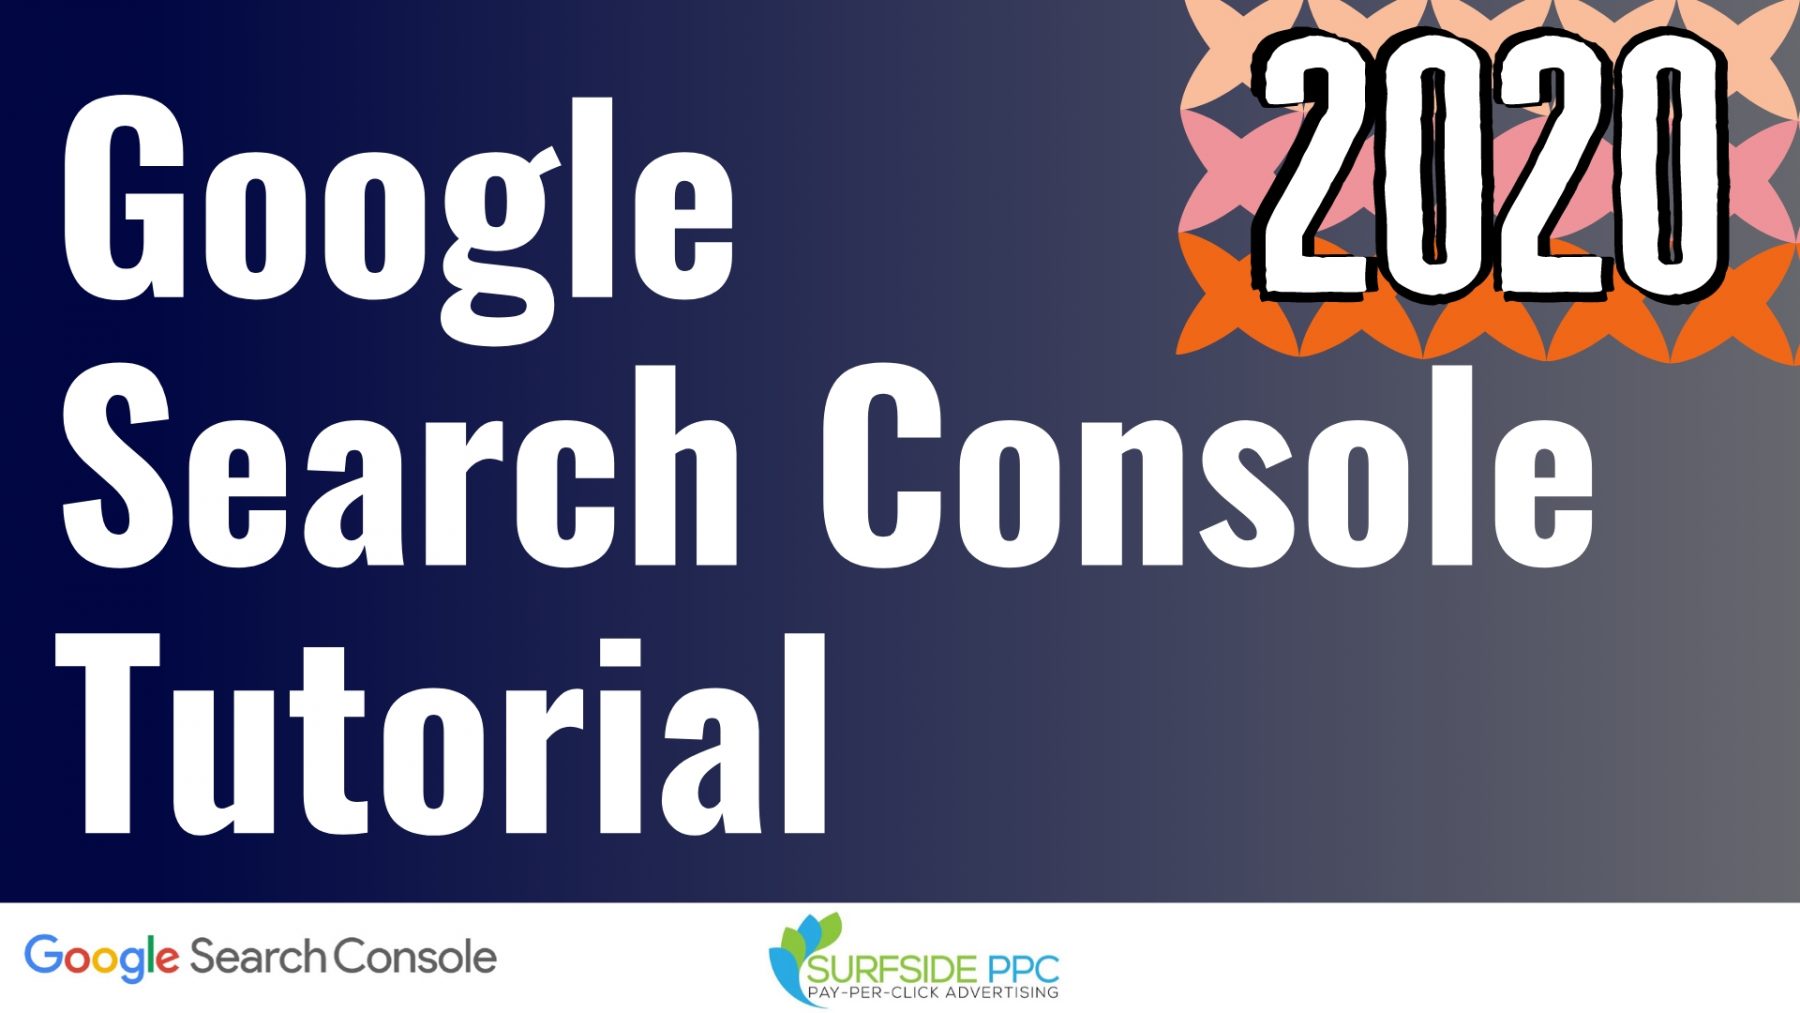 Google Search Console: Complete Guide For 2022